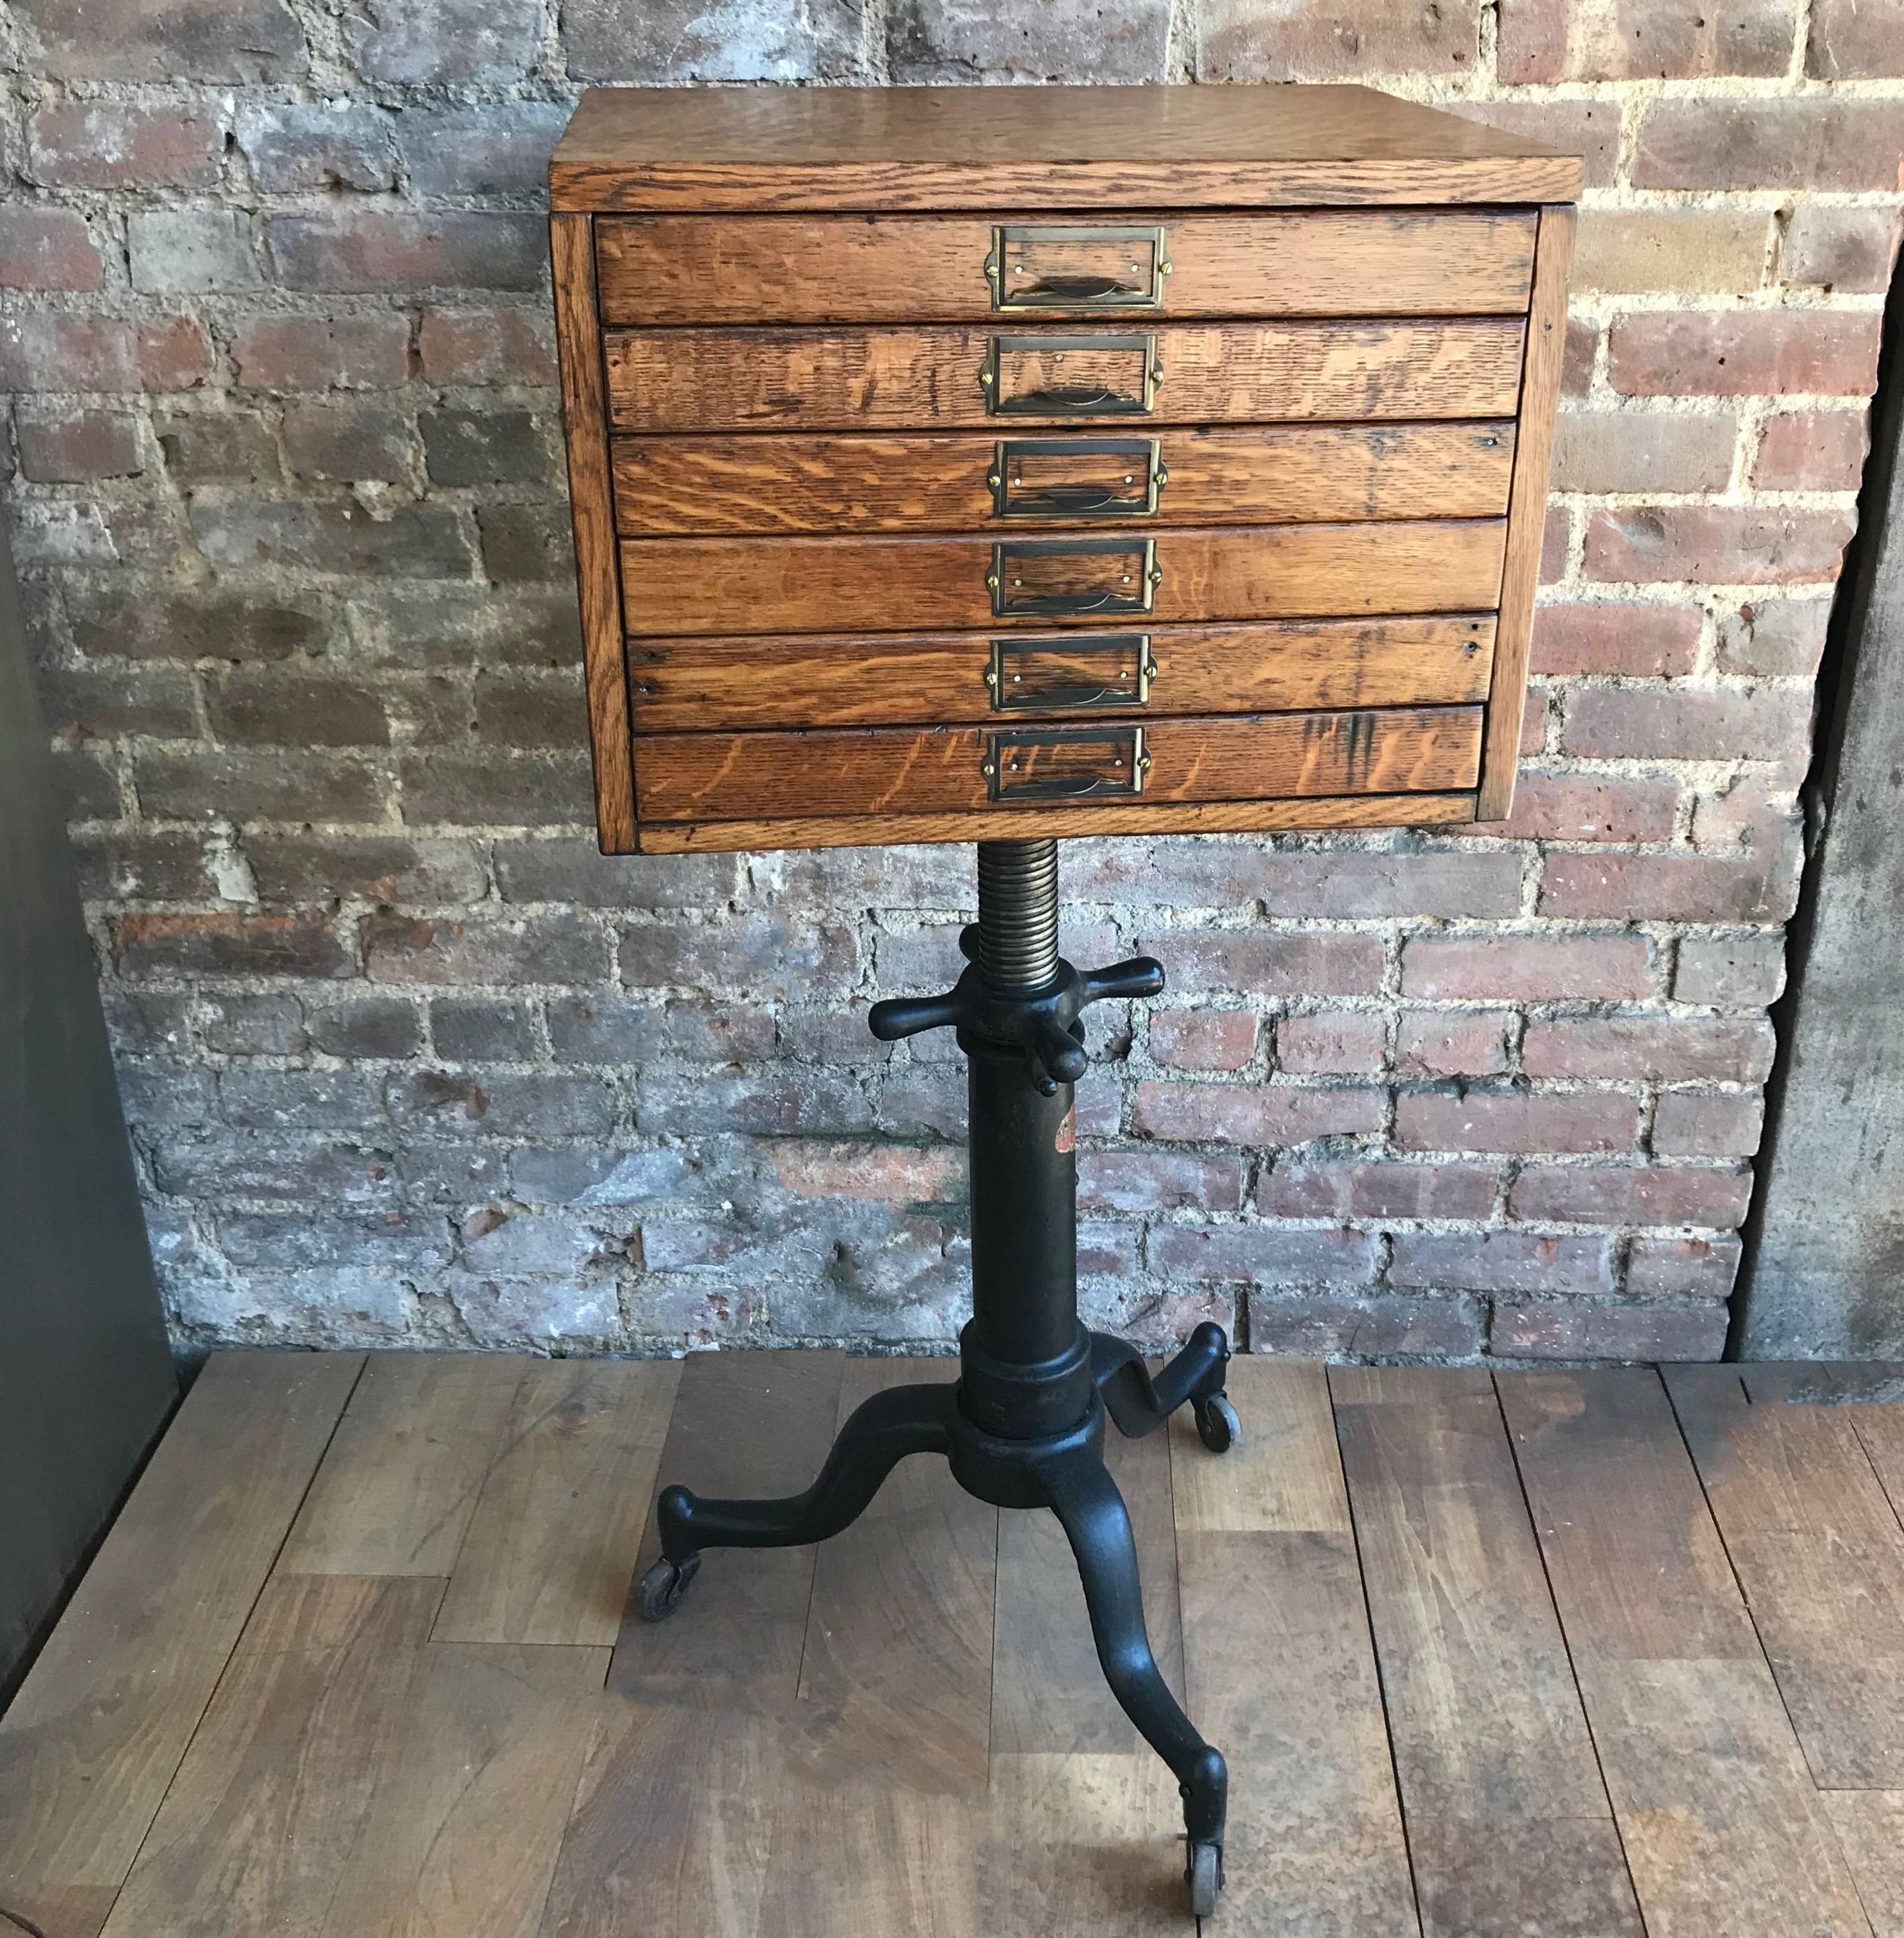 Custom, industrial, early 20th century, quarter sawn oak flat file cabinet with brass pulls mounted atop a height adjustable, cast iron pedestal base. The cabinet height measures 13.5 inches and the drawer interiors measure 16 inches wide x 10.5